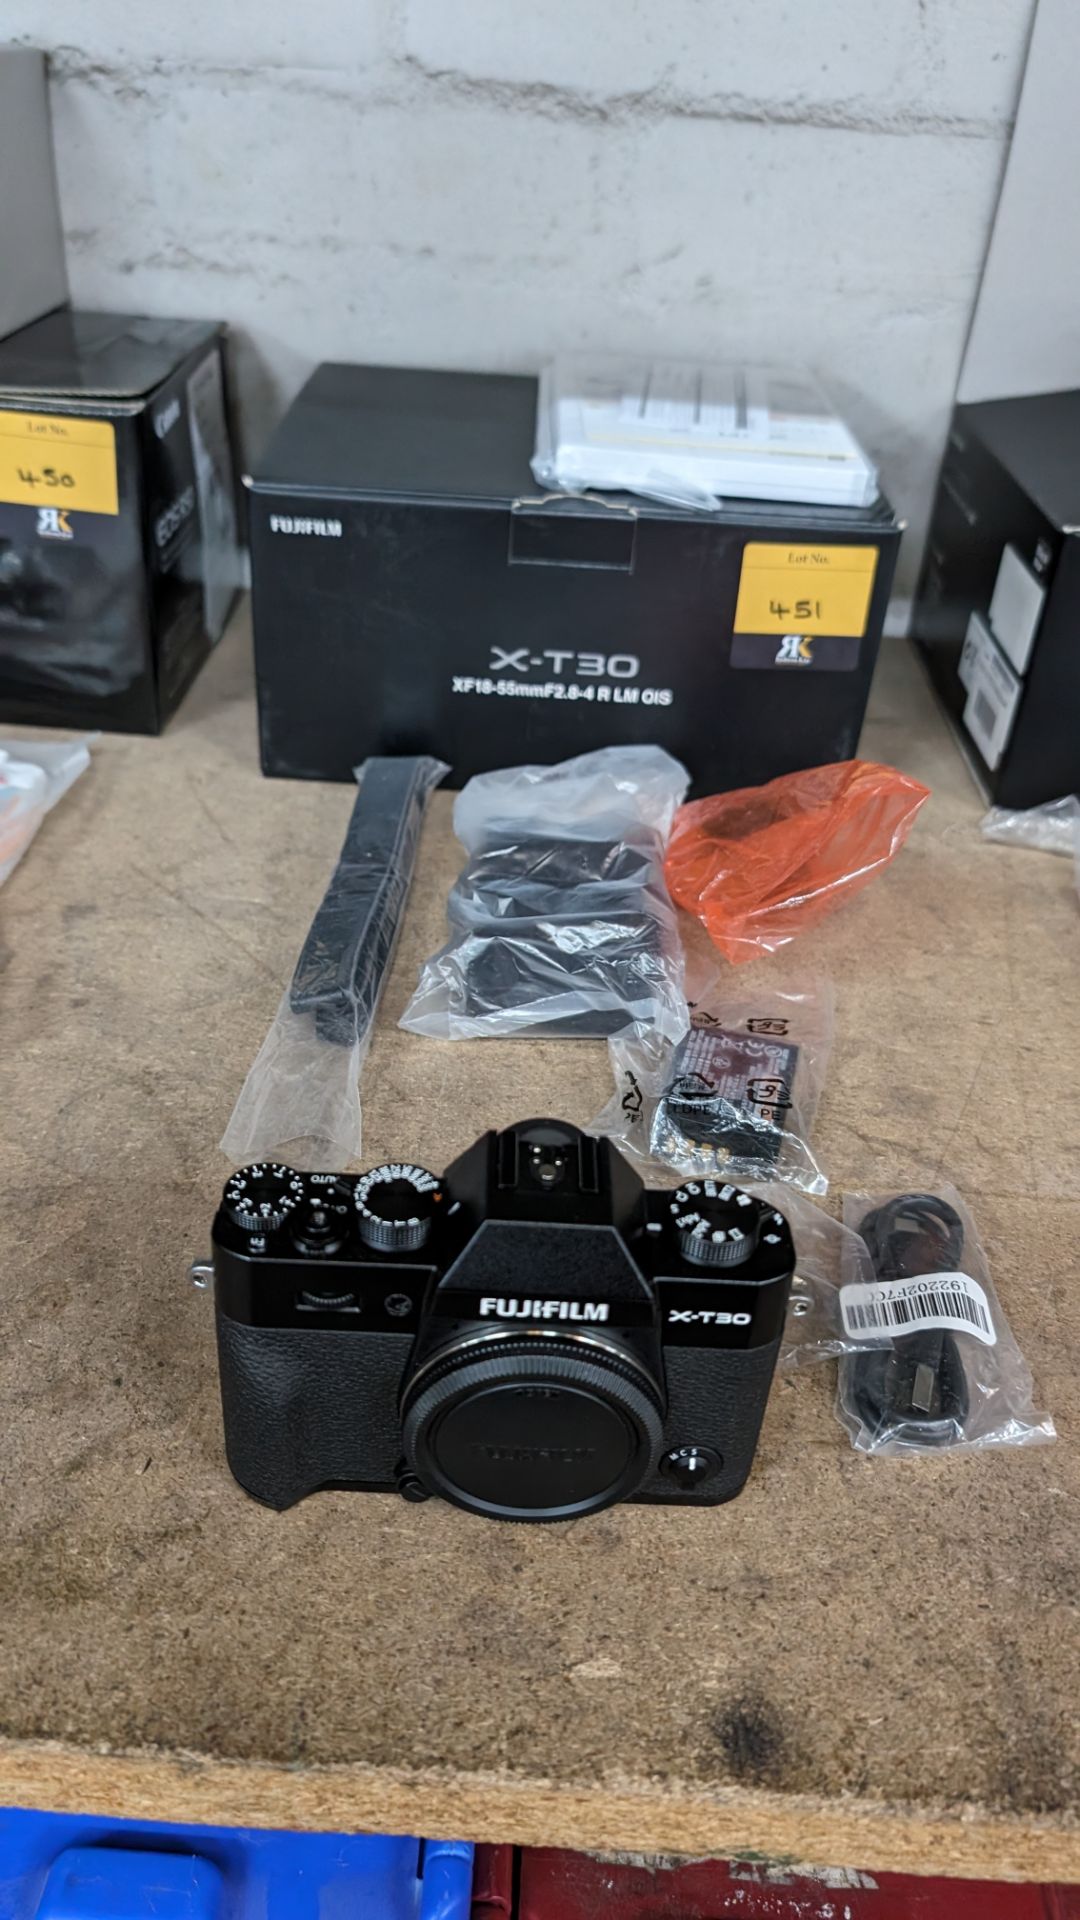 Fujifilm X-T30 camera, including battery, charger, cables, strap and more. NB: no lens